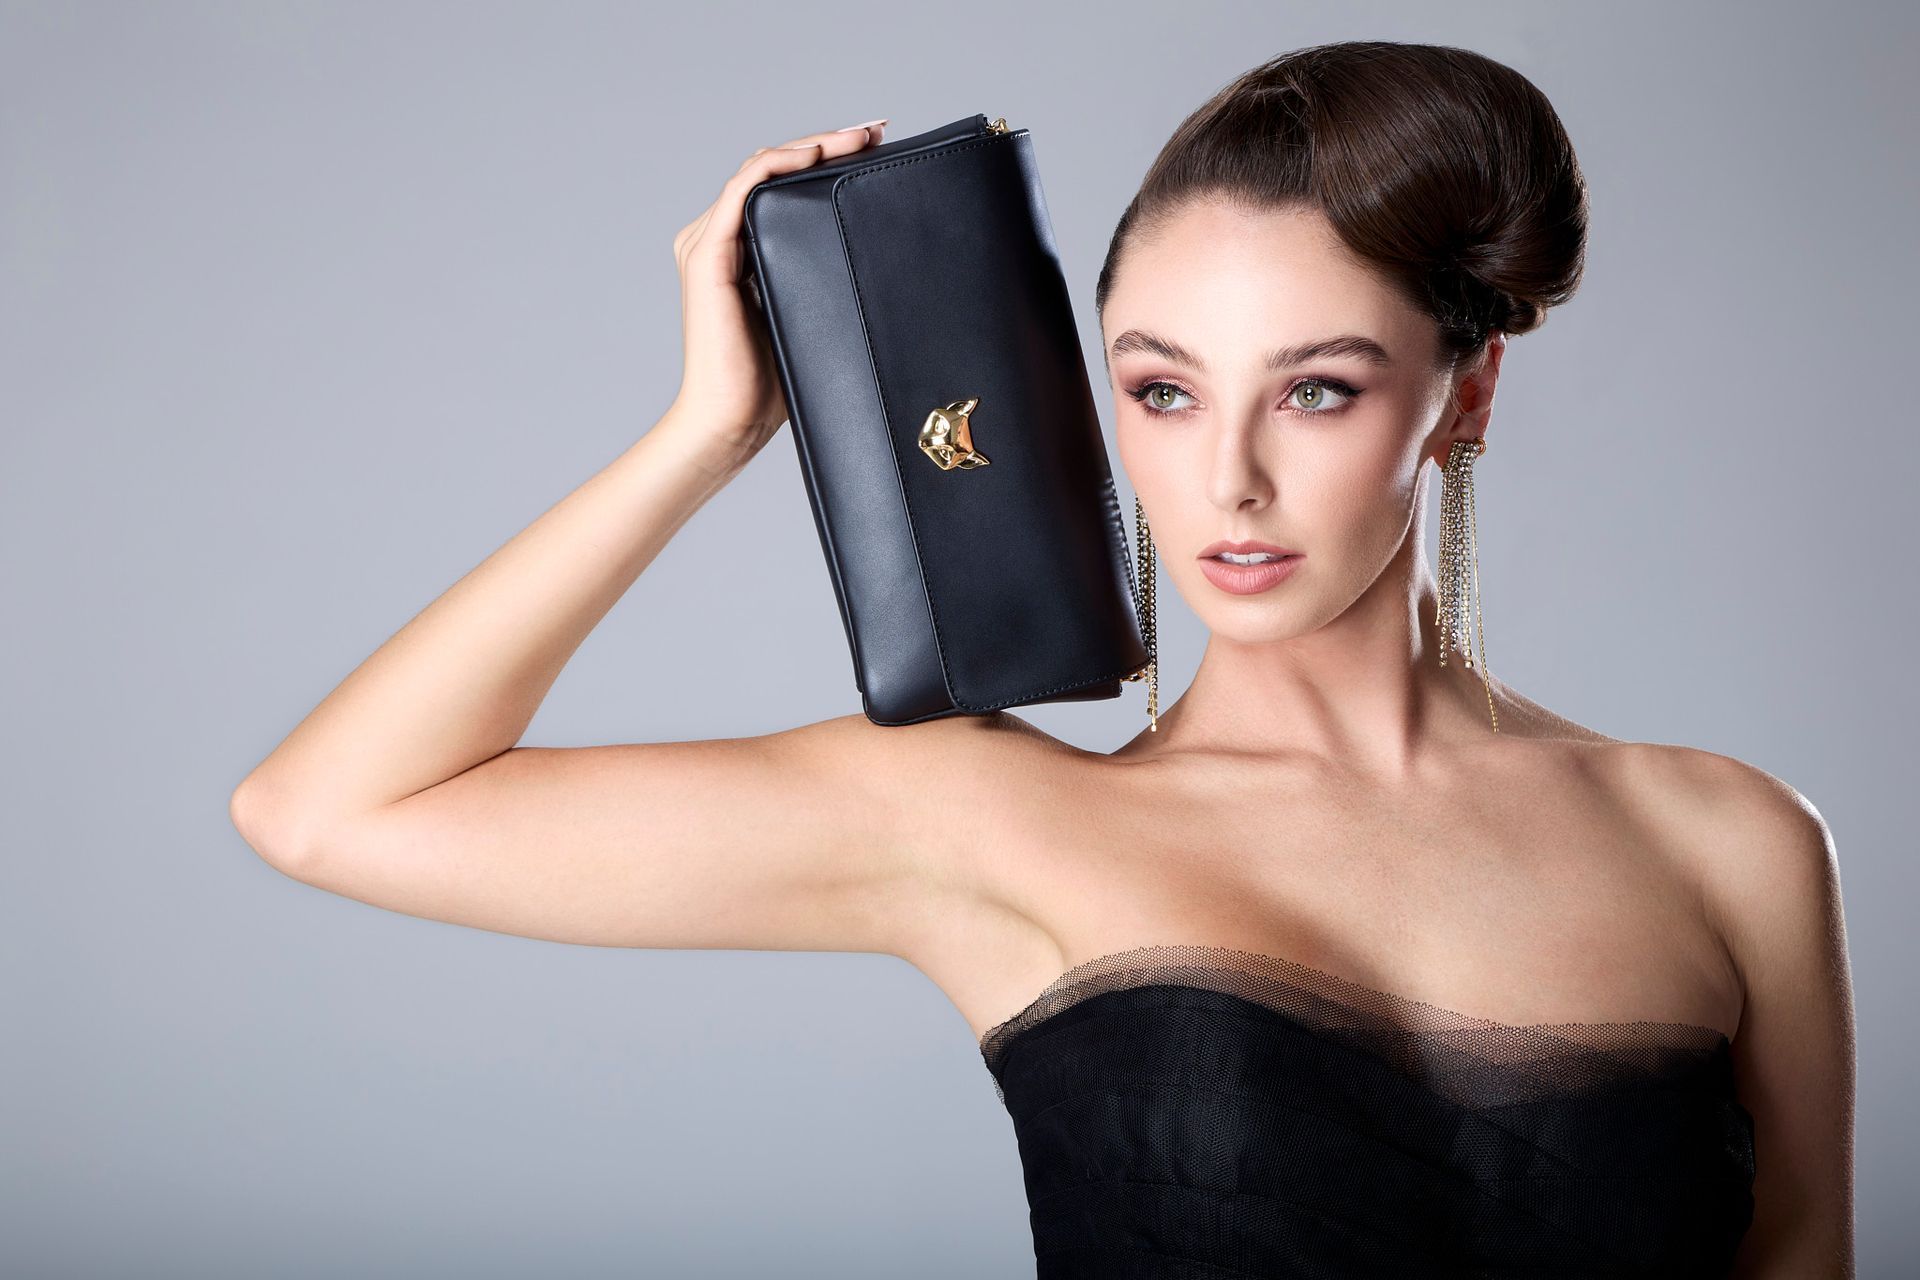 International top model wearing a black strapless dress and earrings, with purse for NY Fashion week.